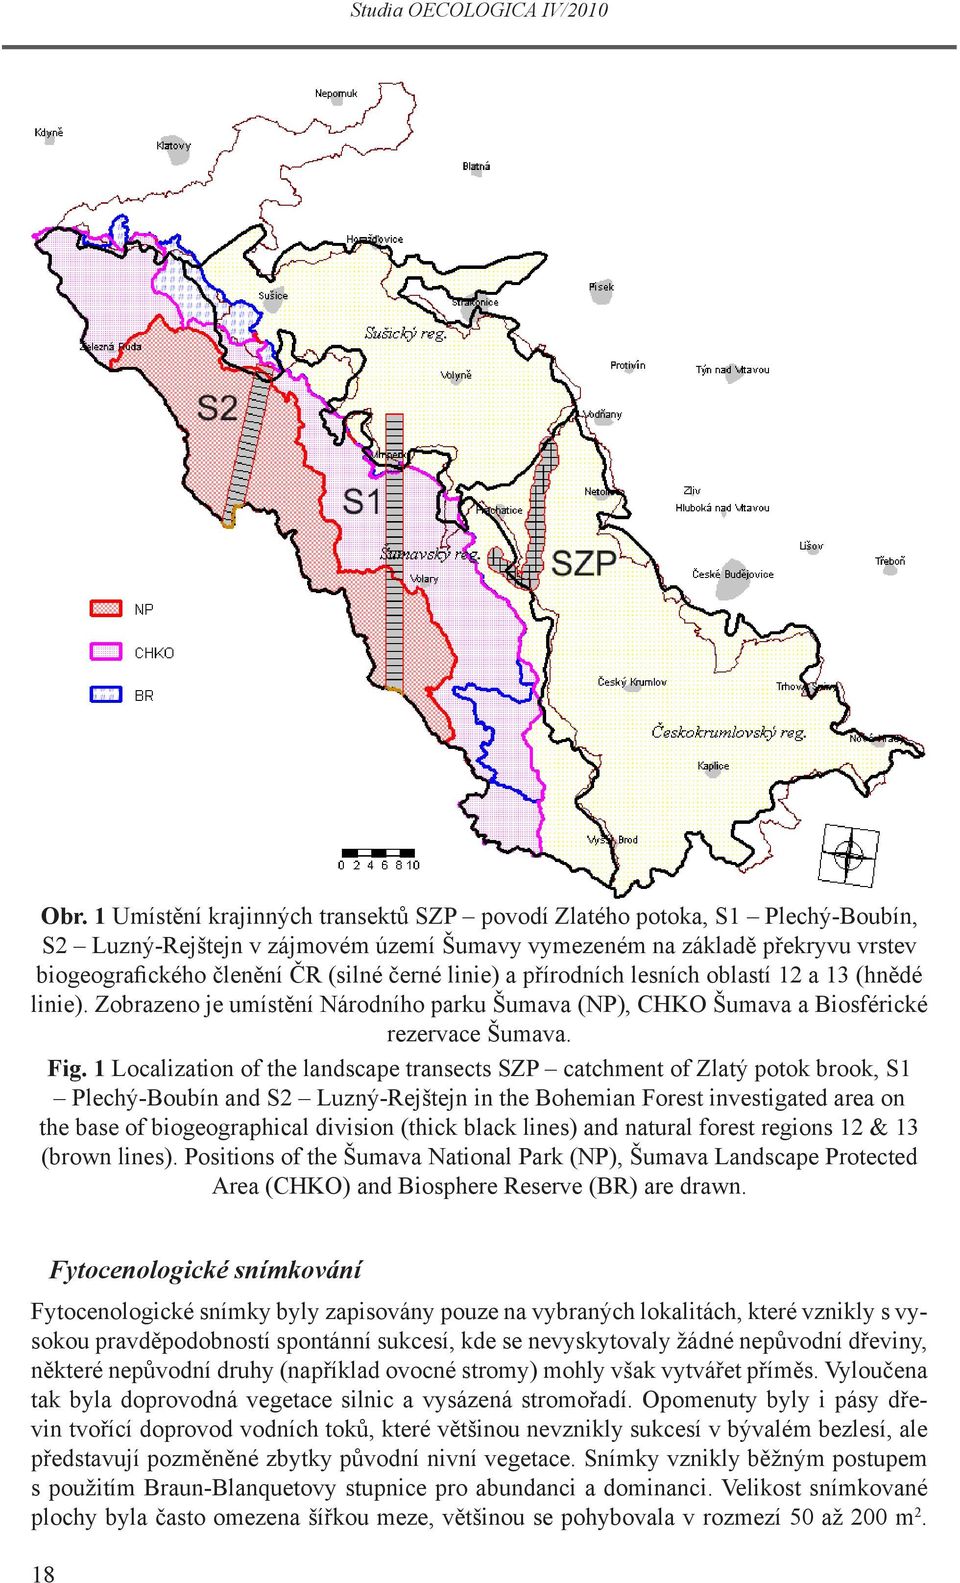 1 Localization of the landscape transects SZP catchment of Zlatý potok brook, S1 Plechý-Boubín and S2 Luzný-Rejštejn in the Bohemian Forest investigated area on the base of biogeographical division